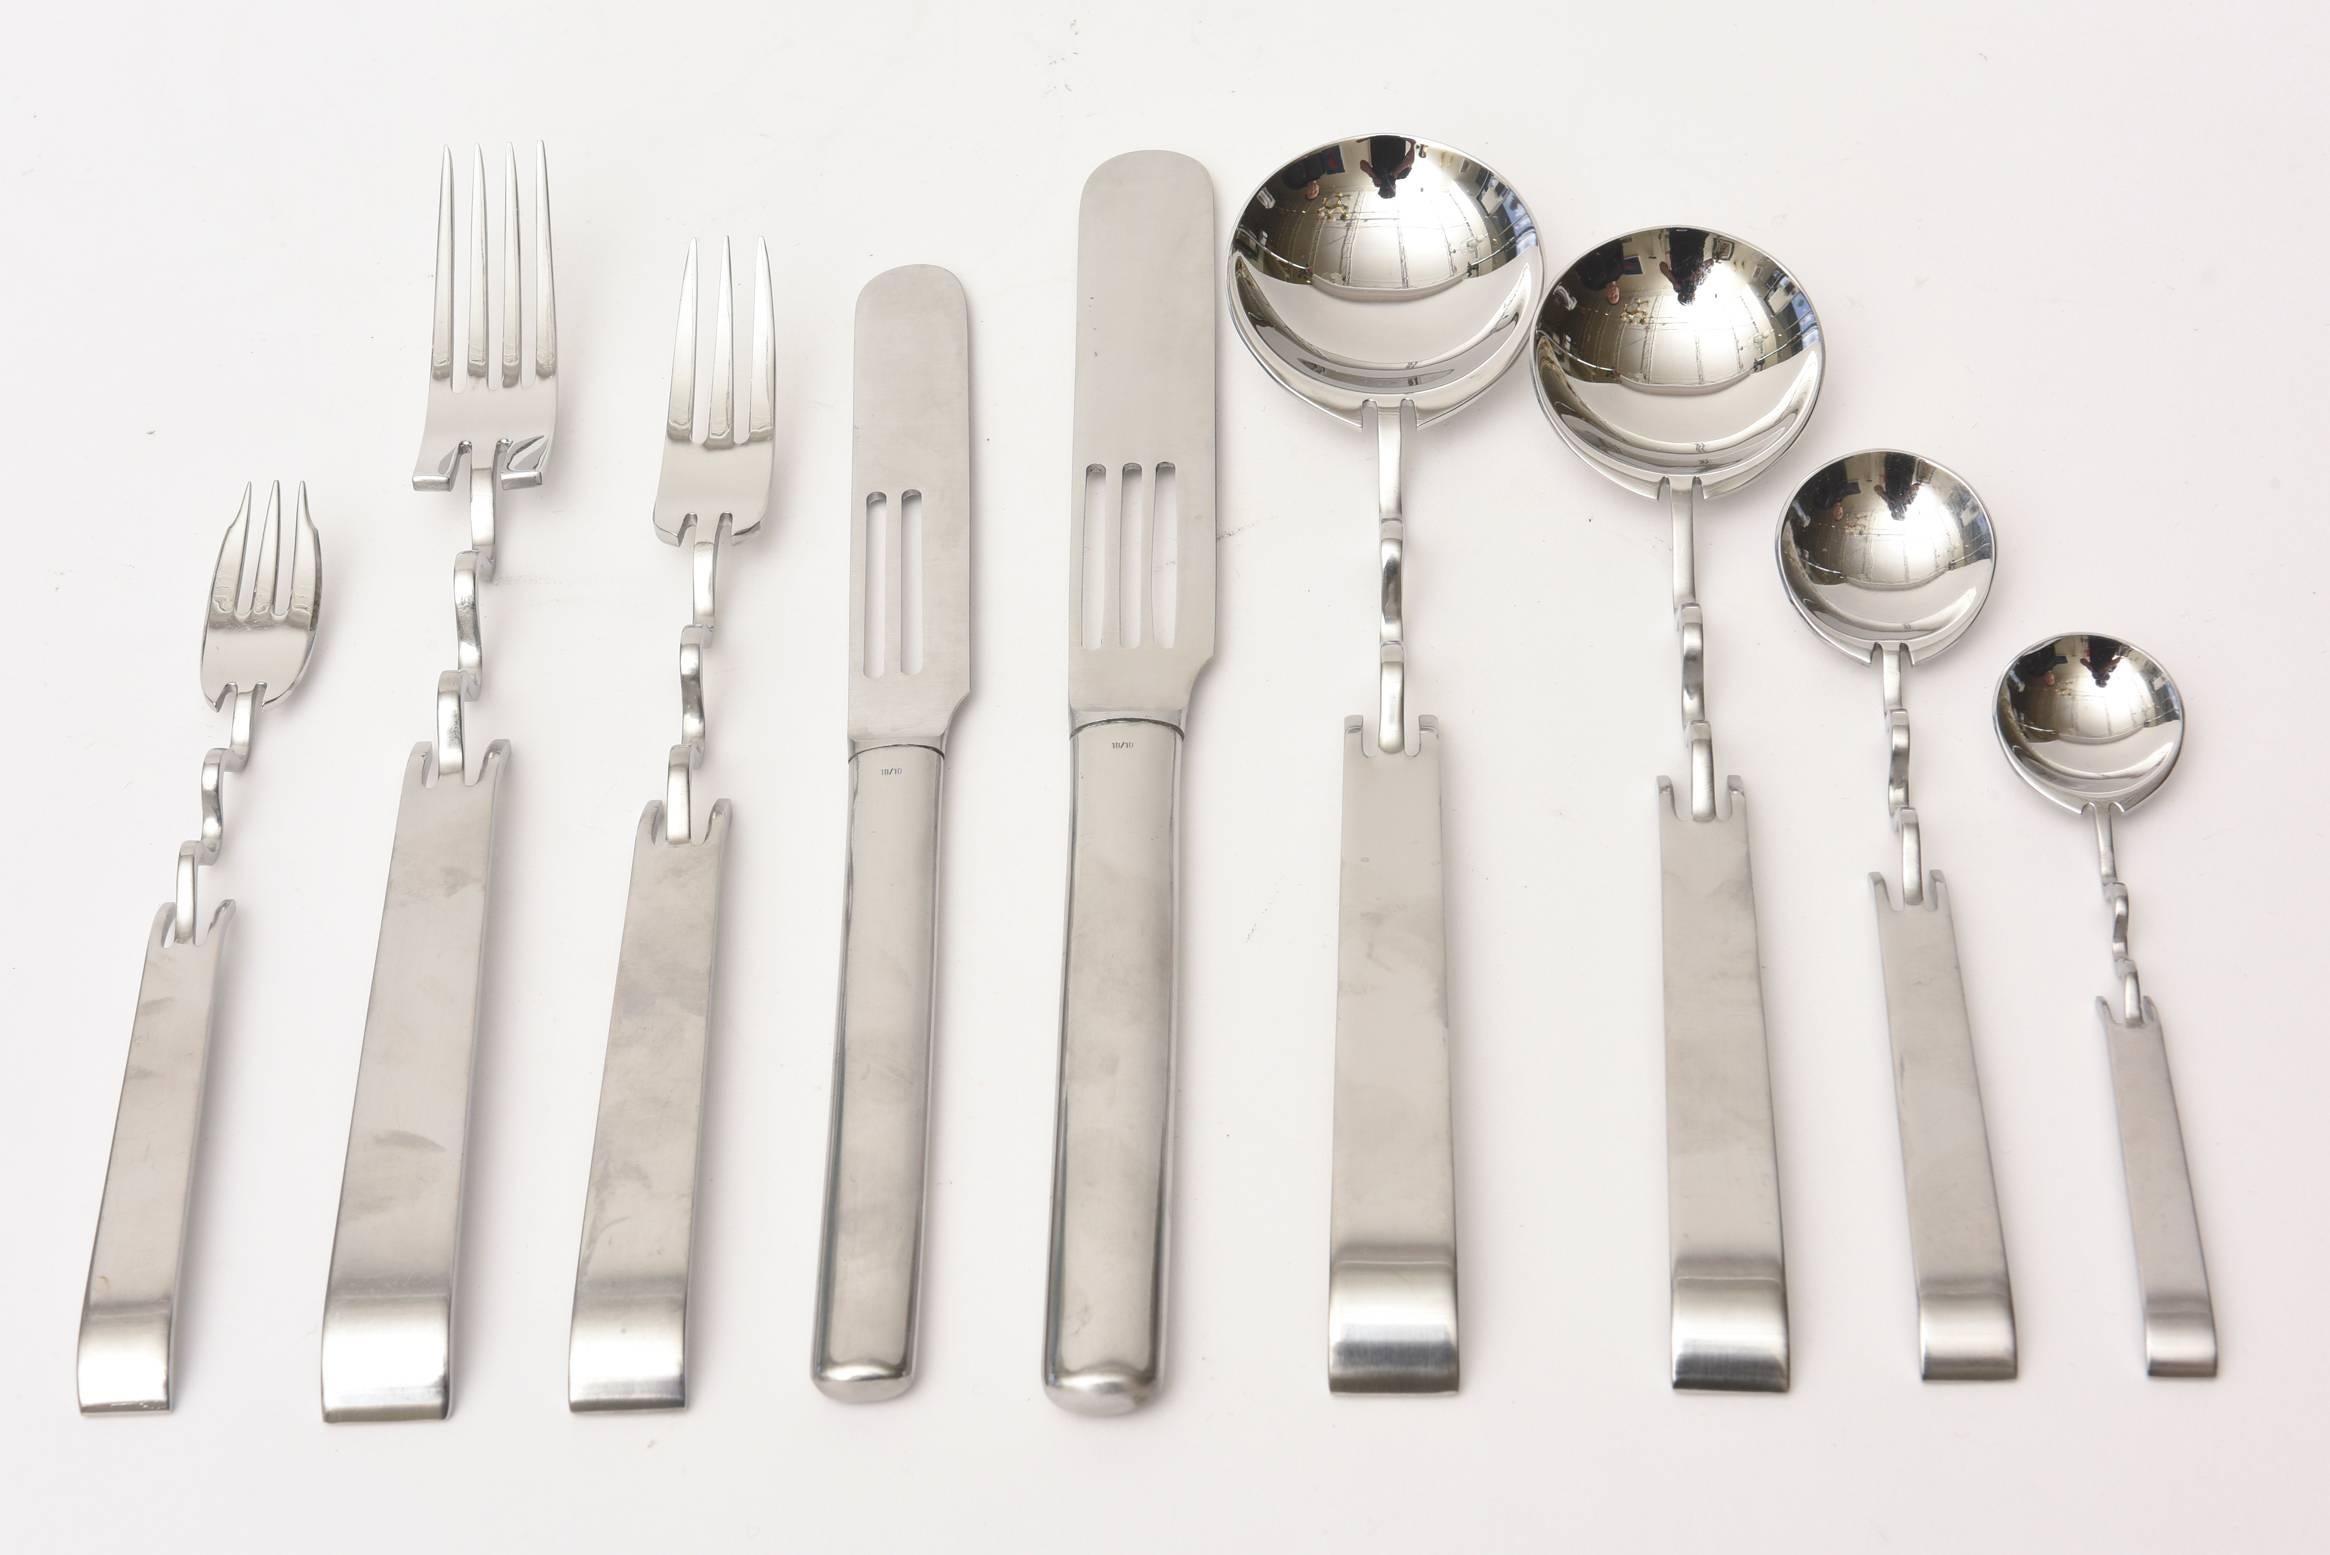 This sculptural and extremely rare set of 60 pieces of stainless steel signed Sabattini for Rosenthal flatware is so amazing. It is signed Rosenthal and designed by Sabattini. It is a work of art and sculpture as flatware for your table. It is